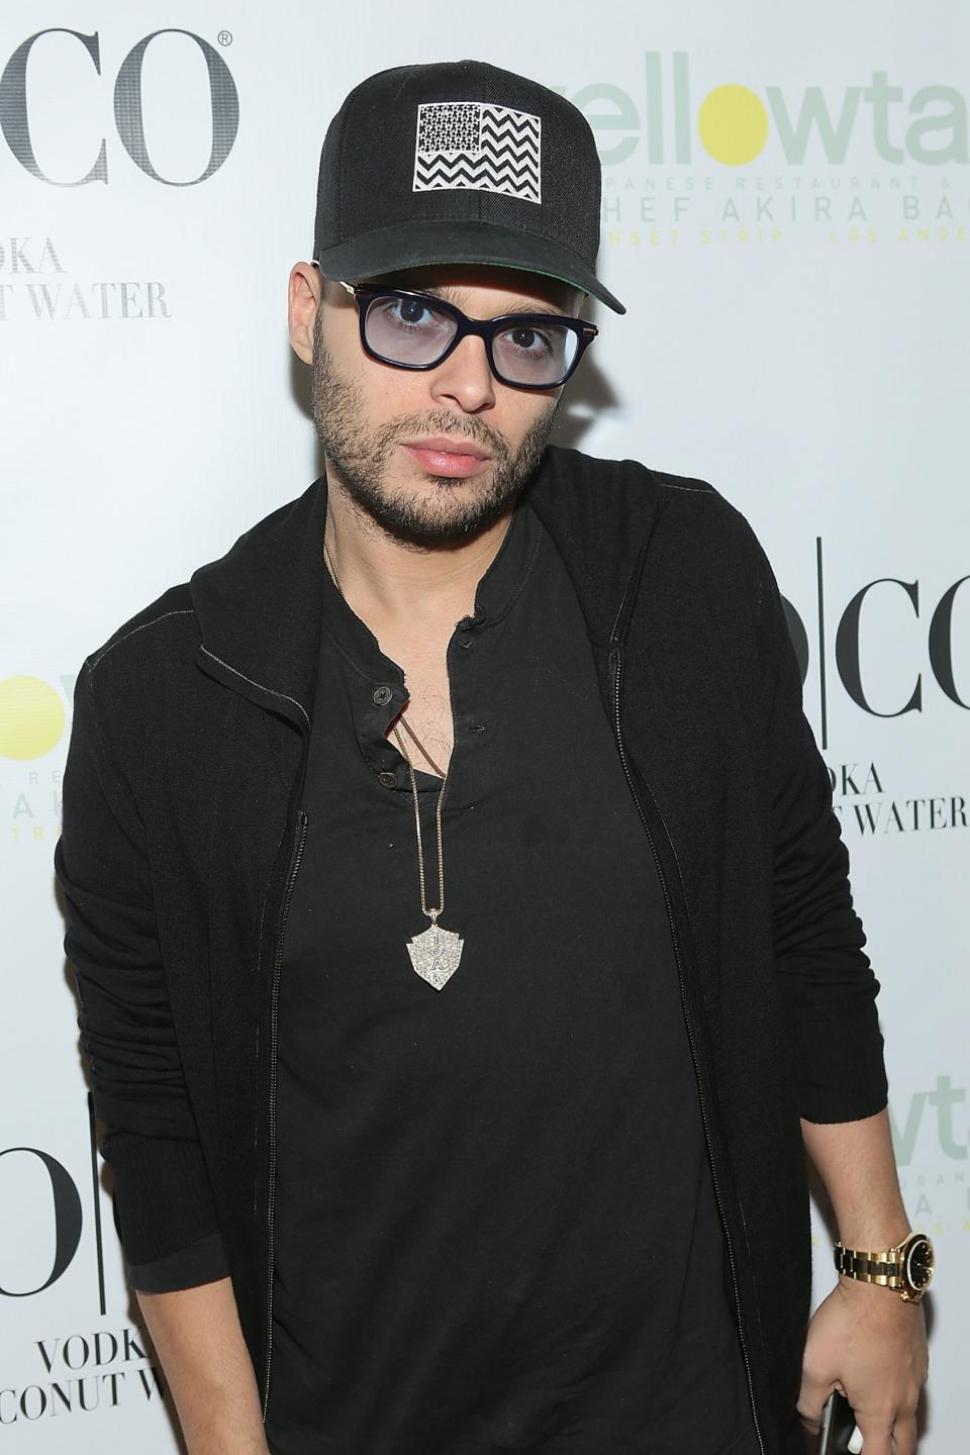 WEST HOLLYWOOD, CA - FEBRUARY 06: Richie Akiva attends the Yellowtail Sunset Grand Opening on February 6, 2015 in West Hollywood, California. (Photo by Mike Windle/Getty Images for Yellowtail Sunset)